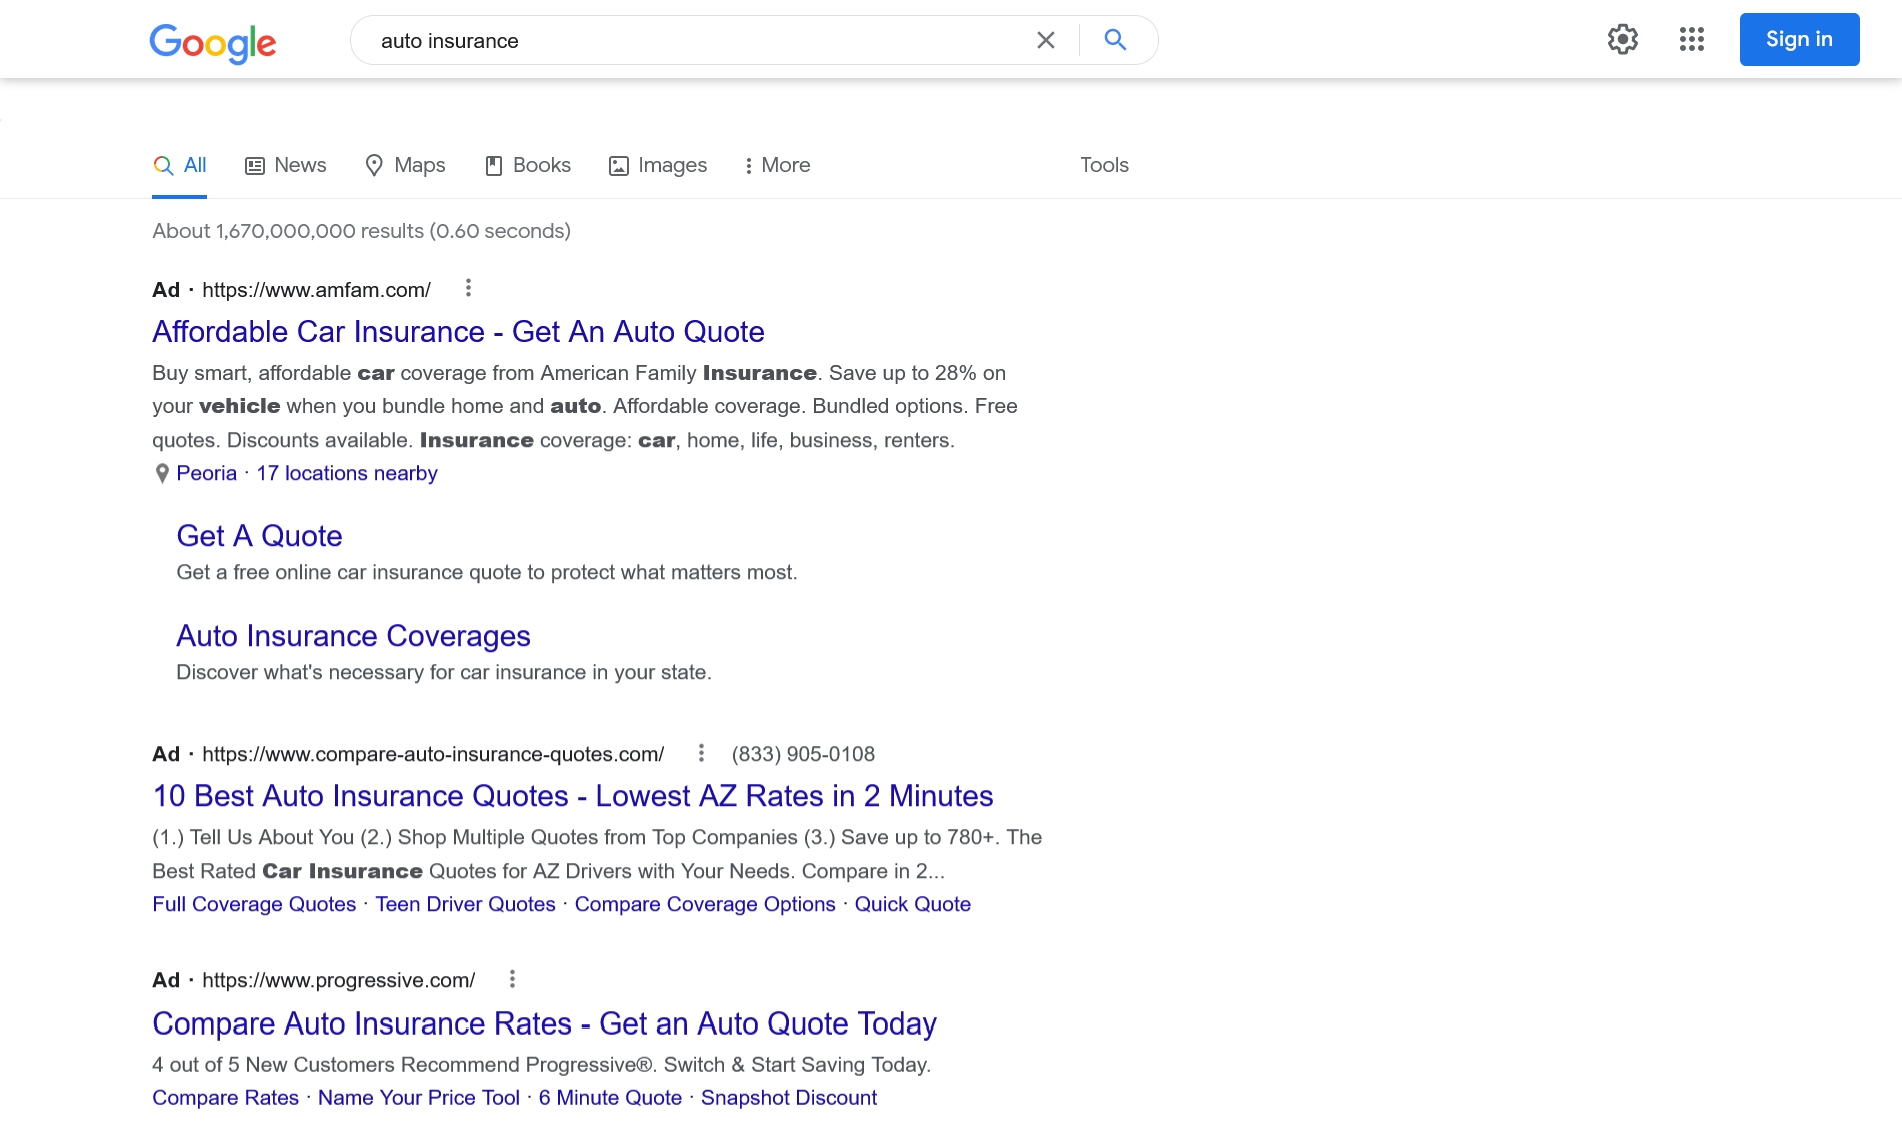 Example of Google Ads SERP feature